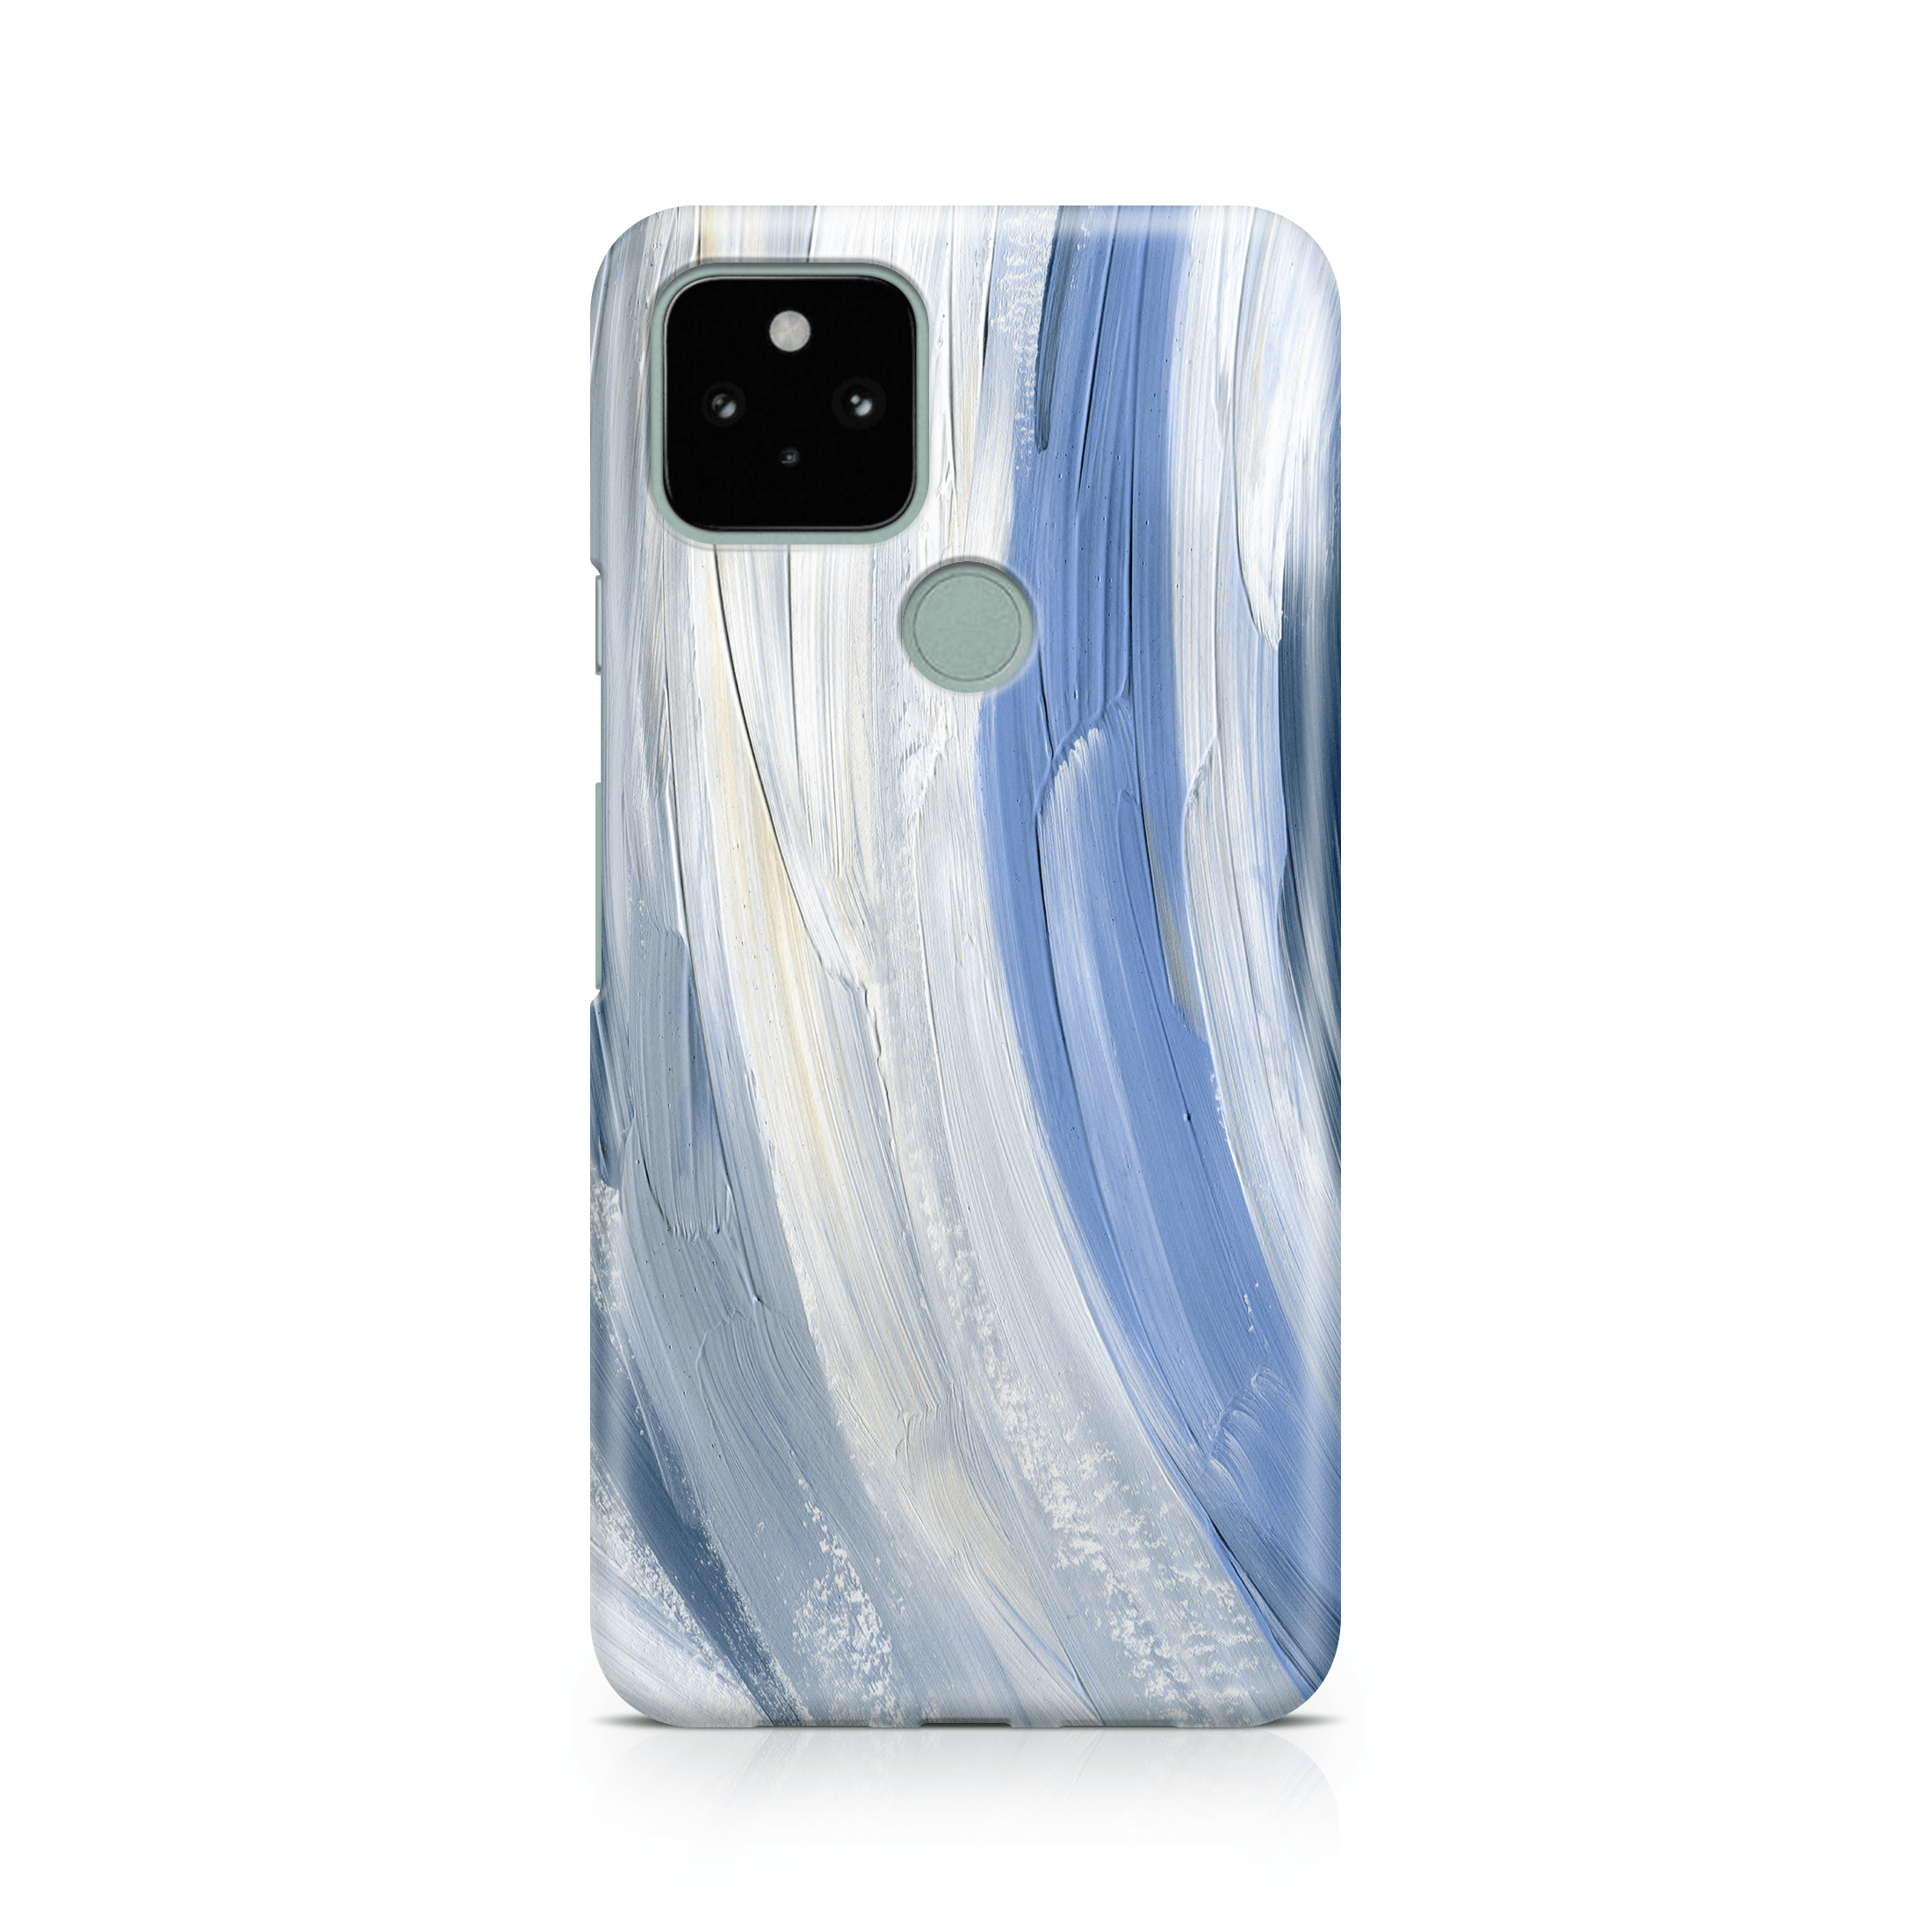 Blue Out - Google phone case designs by CaseSwagger